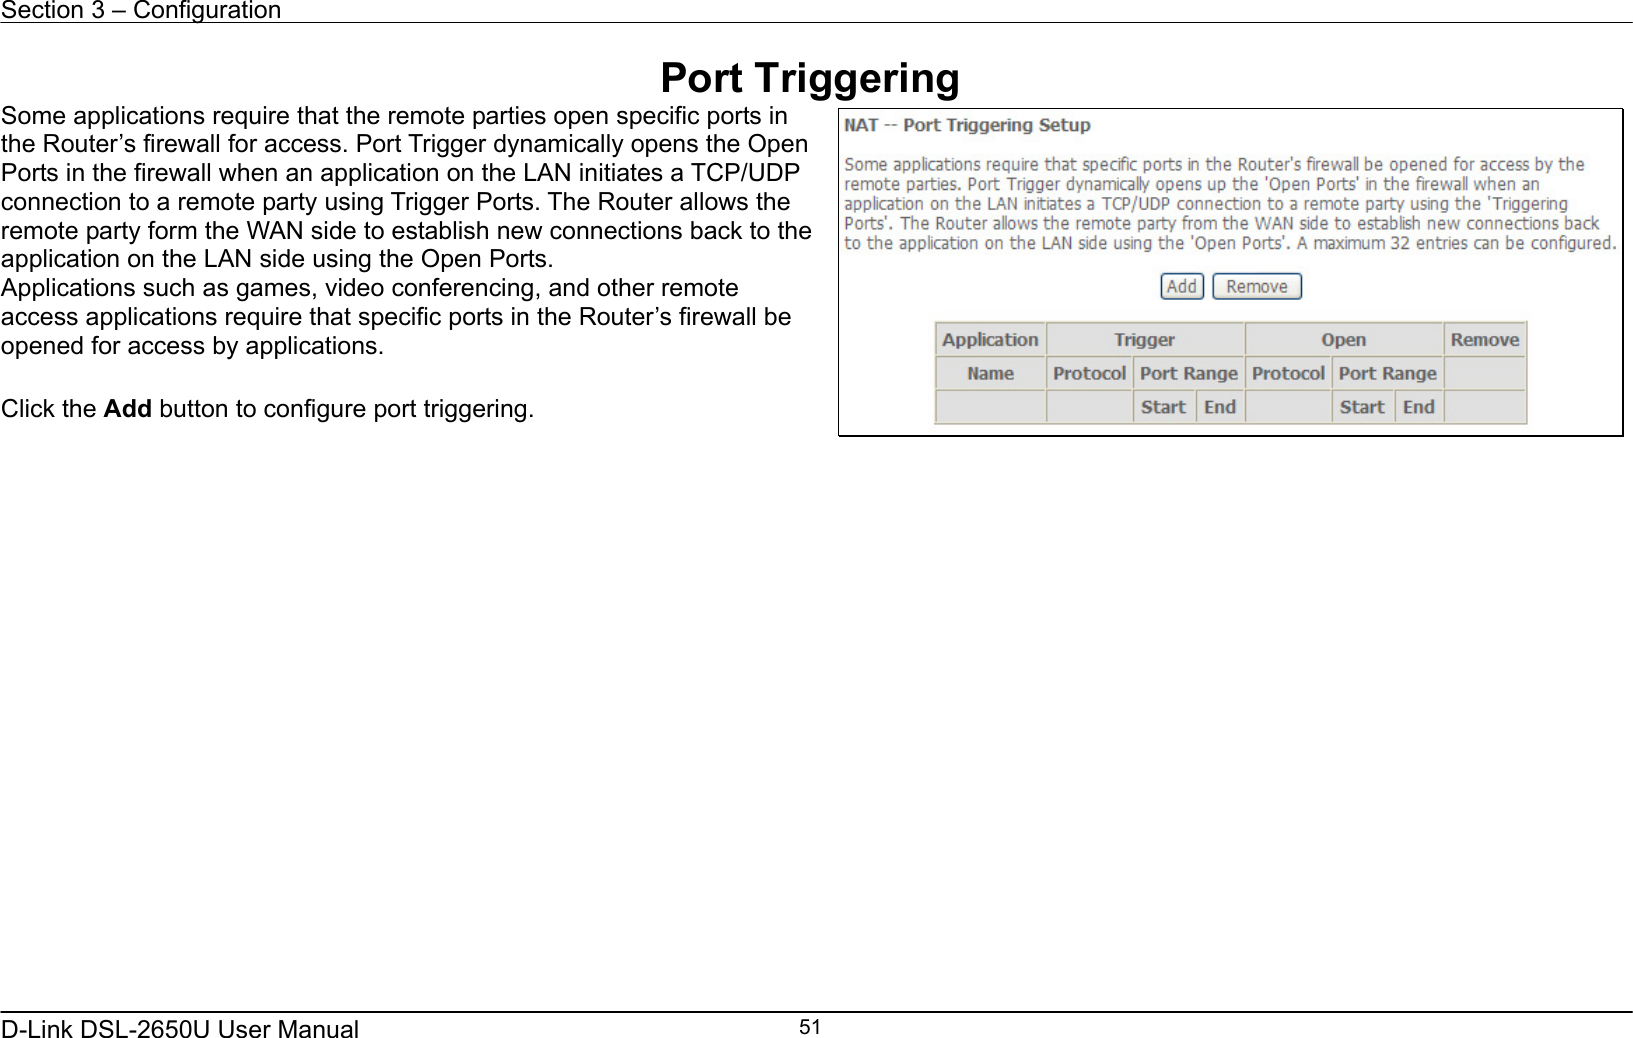 Section 3 – Configuration   D-Link DSL-2650U User Manual    51Port Triggering Some applications require that the remote parties open specific ports in the Router’s firewall for access. Port Trigger dynamically opens the Open Ports in the firewall when an application on the LAN initiates a TCP/UDP connection to a remote party using Trigger Ports. The Router allows the remote party form the WAN side to establish new connections back to the application on the LAN side using the Open Ports. Applications such as games, video conferencing, and other remote access applications require that specific ports in the Router’s firewall be opened for access by applications.    Click the Add button to configure port triggering.      